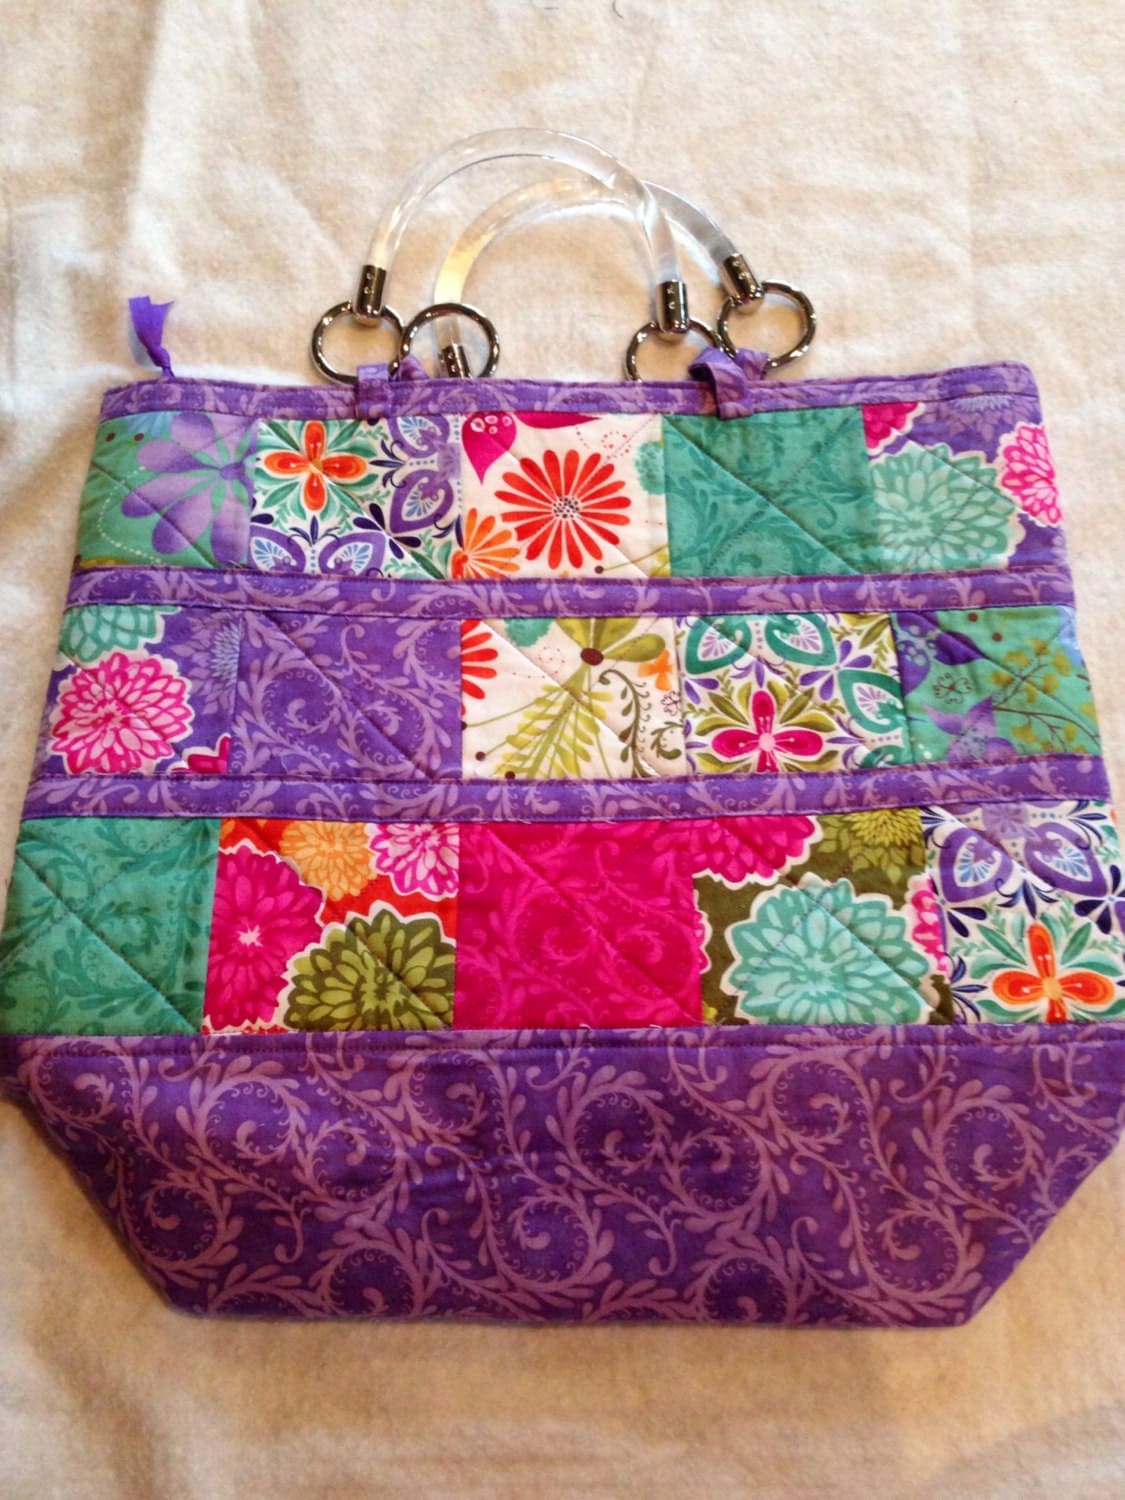 Purple Quilted Tote bag/purse by SewPerfectPatchwork on Etsy